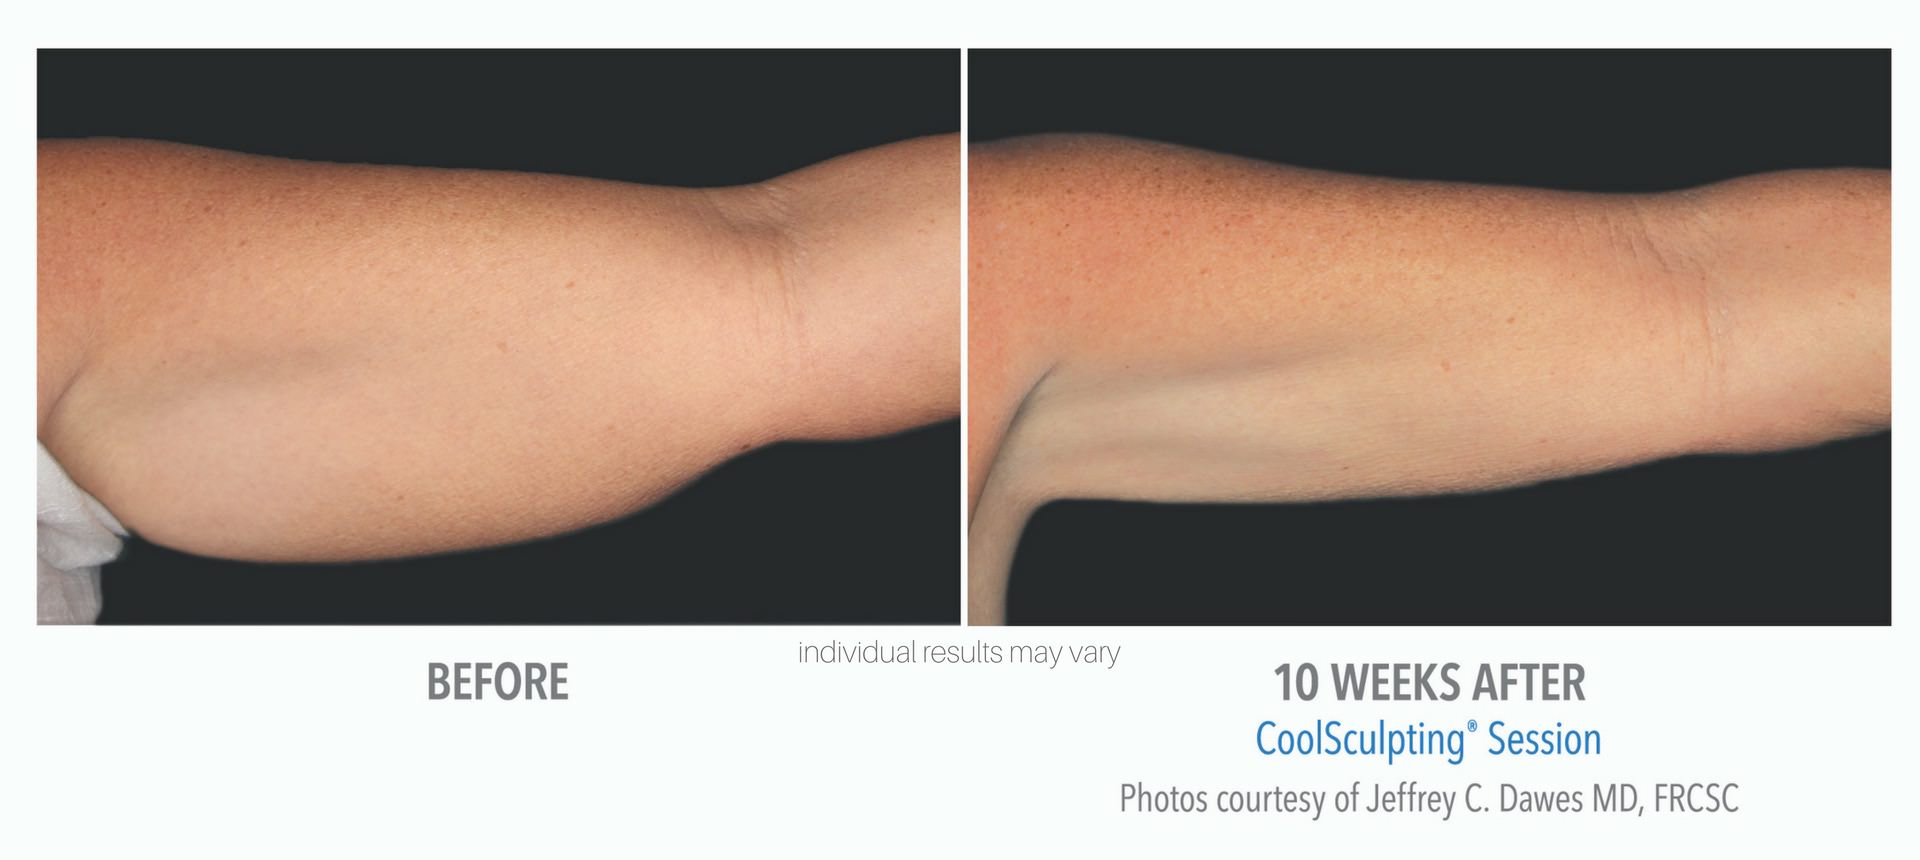 coolsculpting-before-and-after-photos_3